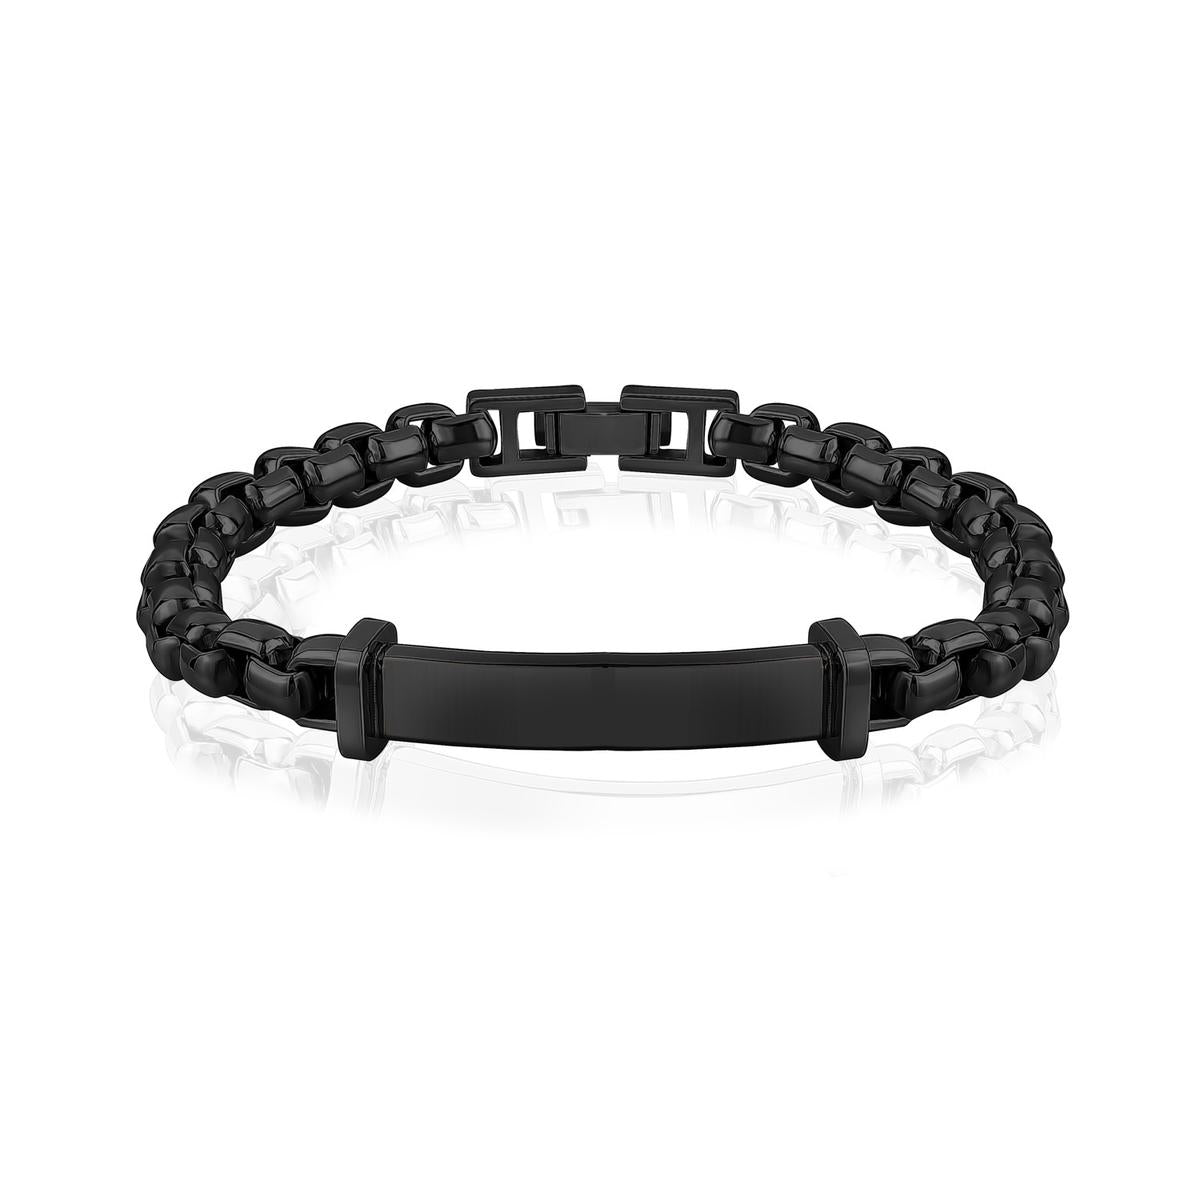 Black Stainless Steel Box Link ID Bracelet 8.5 inches